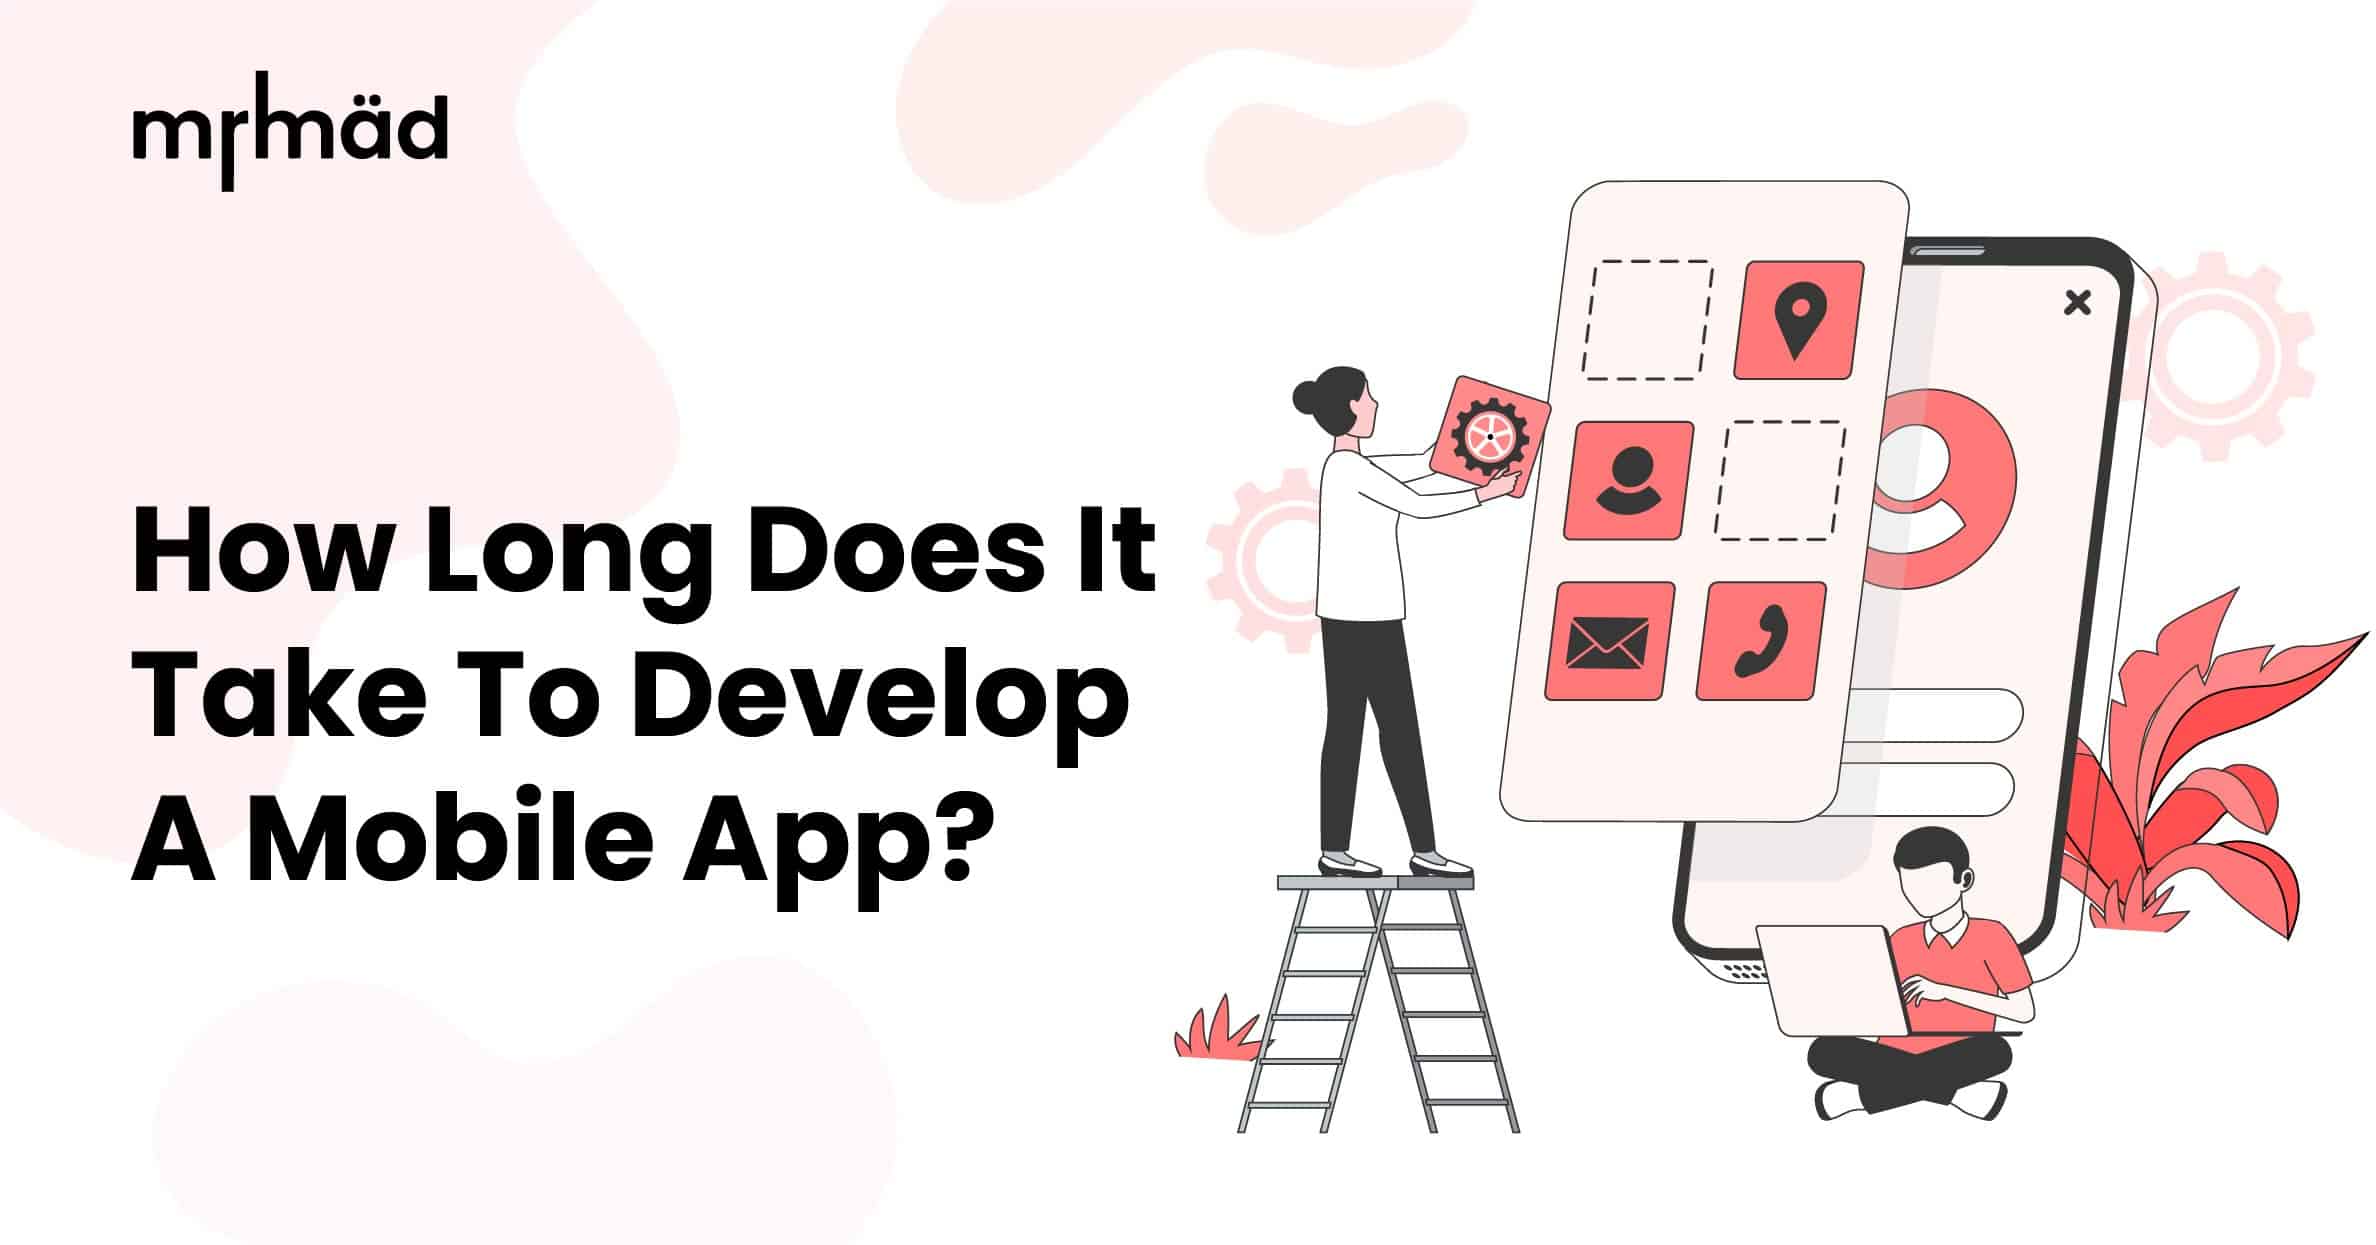 How Long Does It Take To Develop A Mobile App